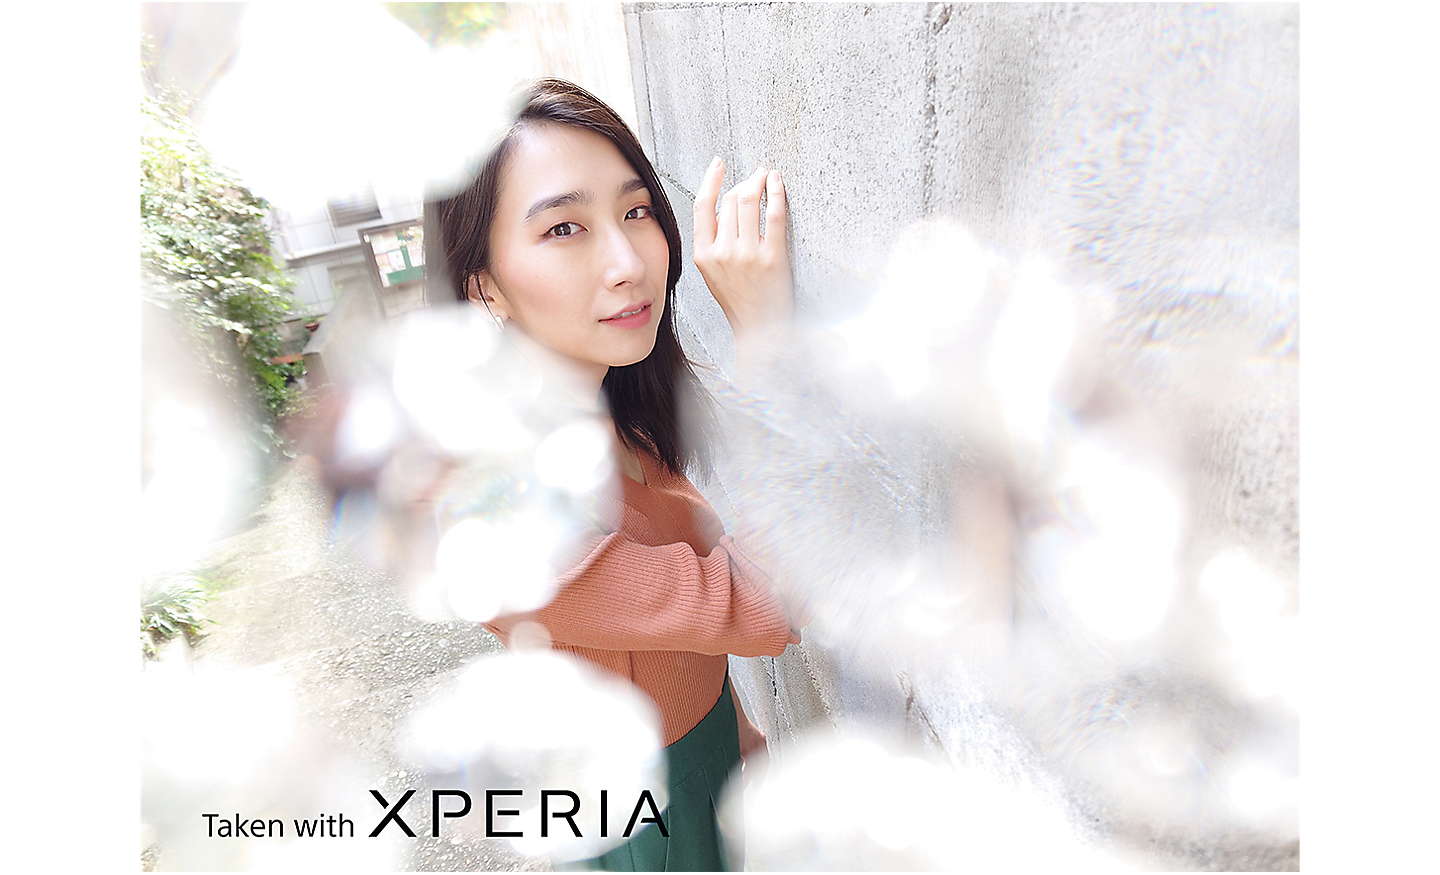 Portrait of a woman in an external setting with blurred objects in the foreground. Text reads "Taken with XPERIA".